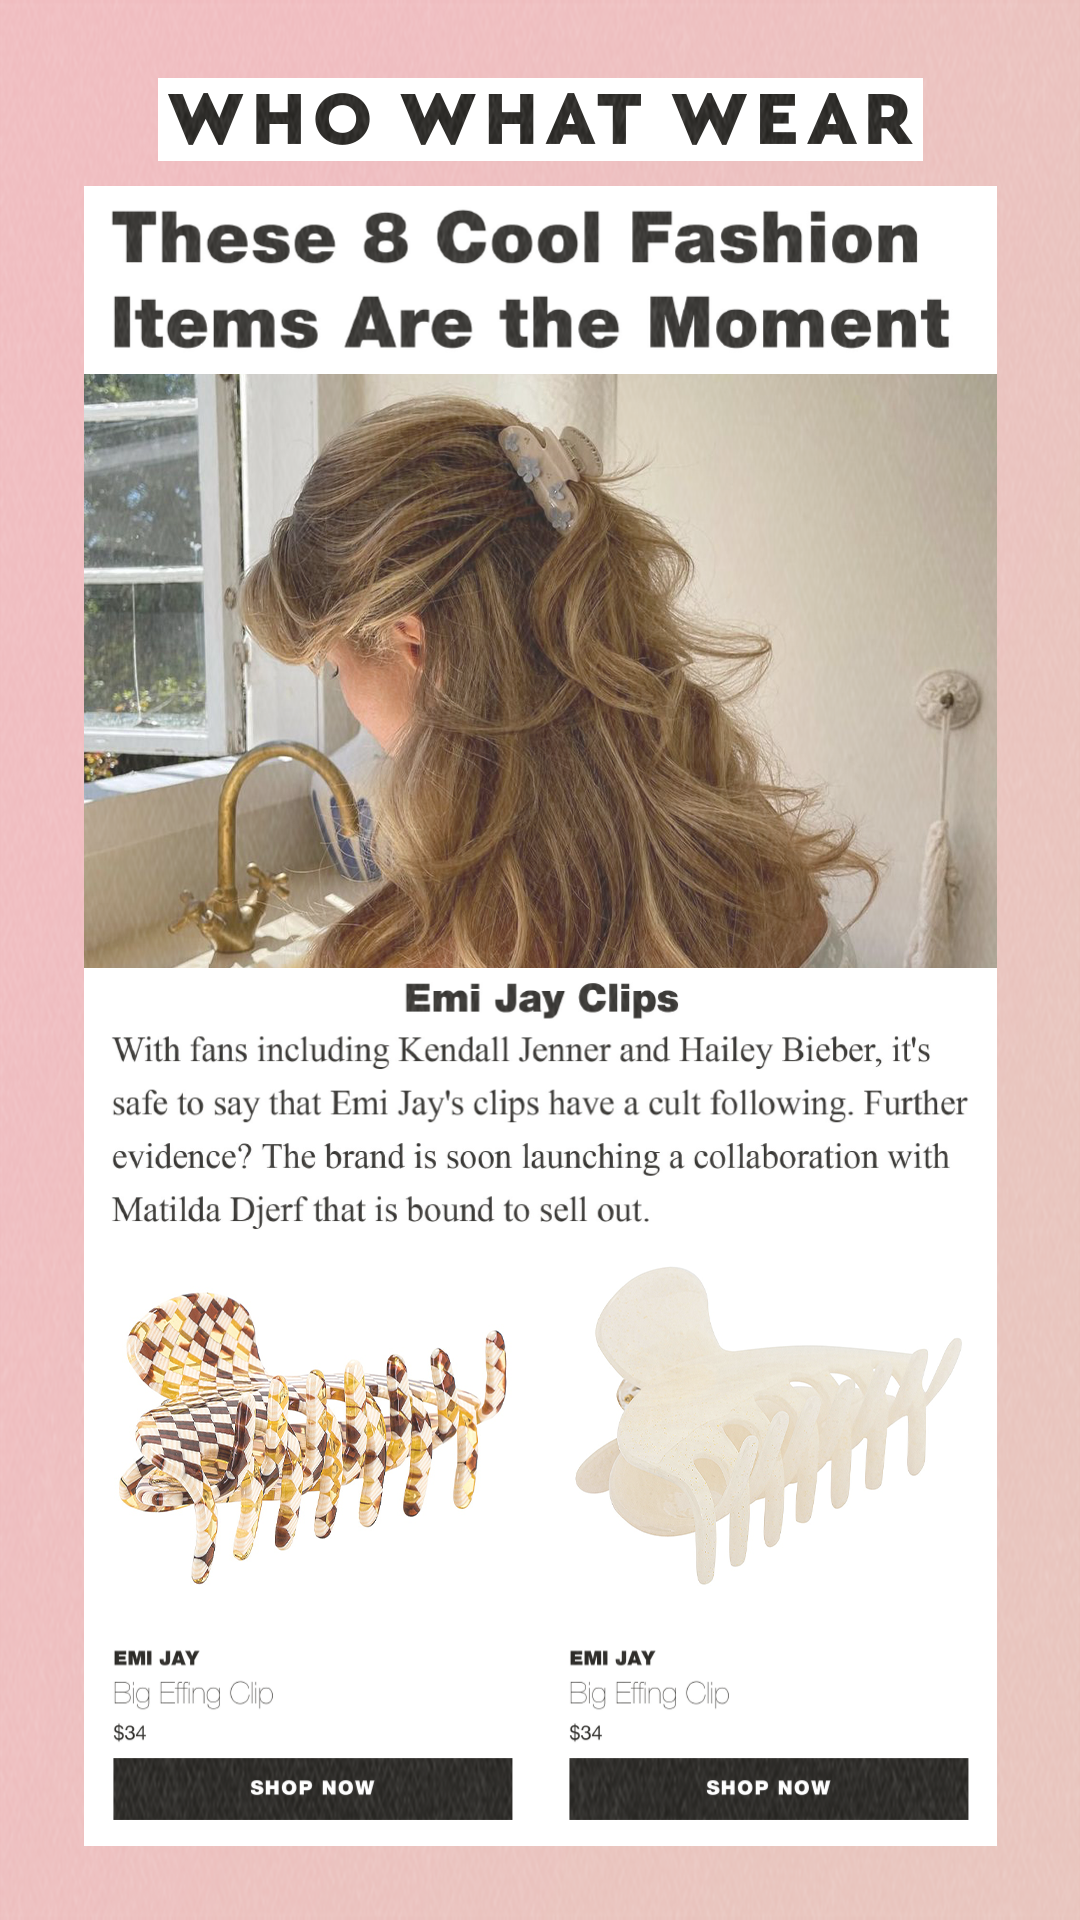 These 8 Cool Fashion Items Are the Moment Emi Jay Clips With fans including Kendall Jenner and Hailey Bieber, it's safe to say that Emi Jay's clips have a cult following. Further evidence? The brand is soon launching a collaboration with Matilda Djerf that is bound to sell out. Emi Jay Big Effing Clip $34 Shop Now. Emi Jay Big Effing Clip $34 Shop Now